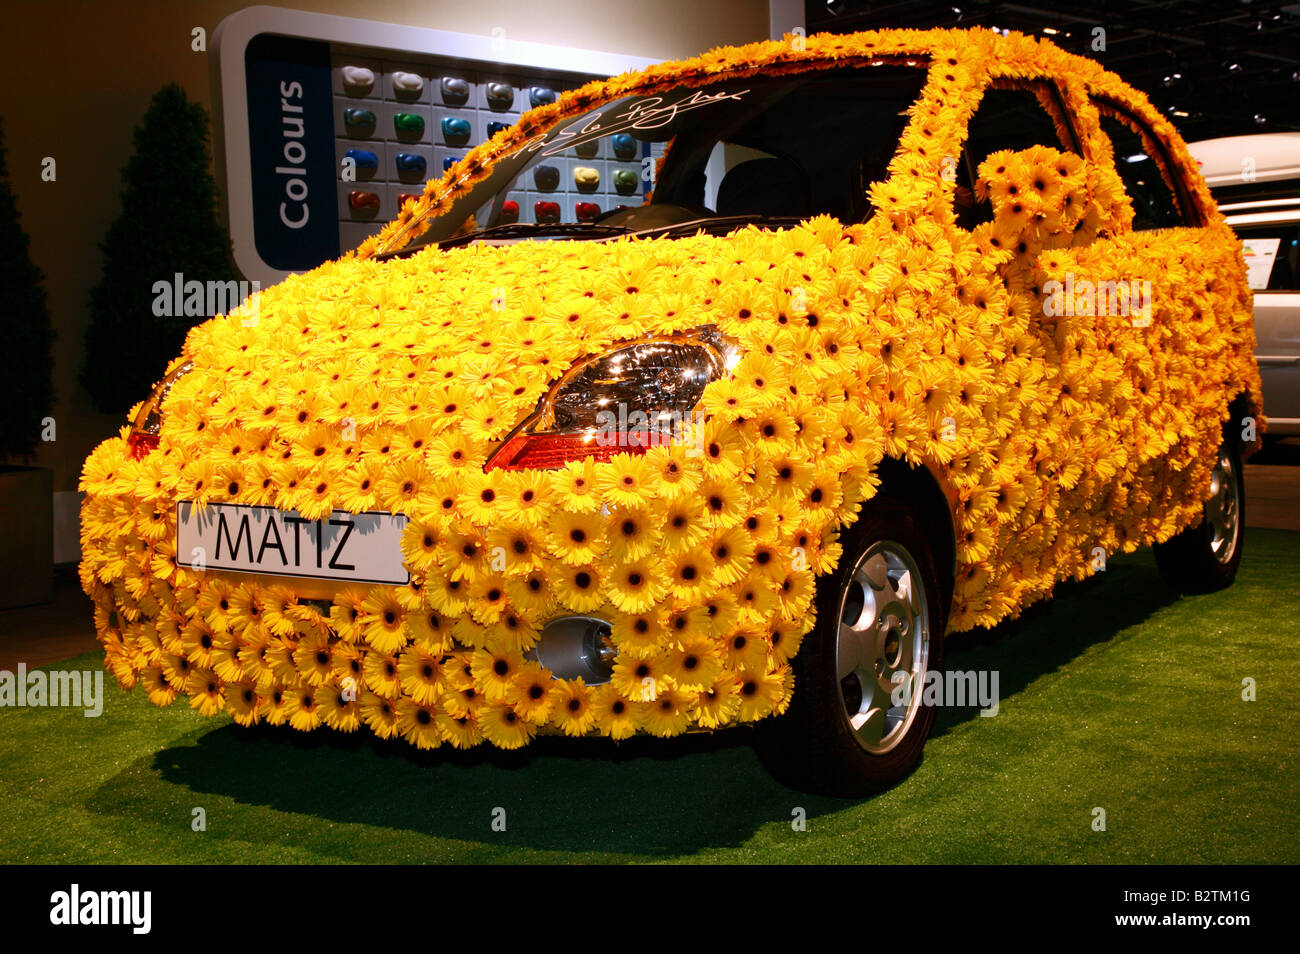 Flower Power: Chevrolet Matiz almost entirely covered in thousands of  yellow Gerberas Stock Photo - Alamy